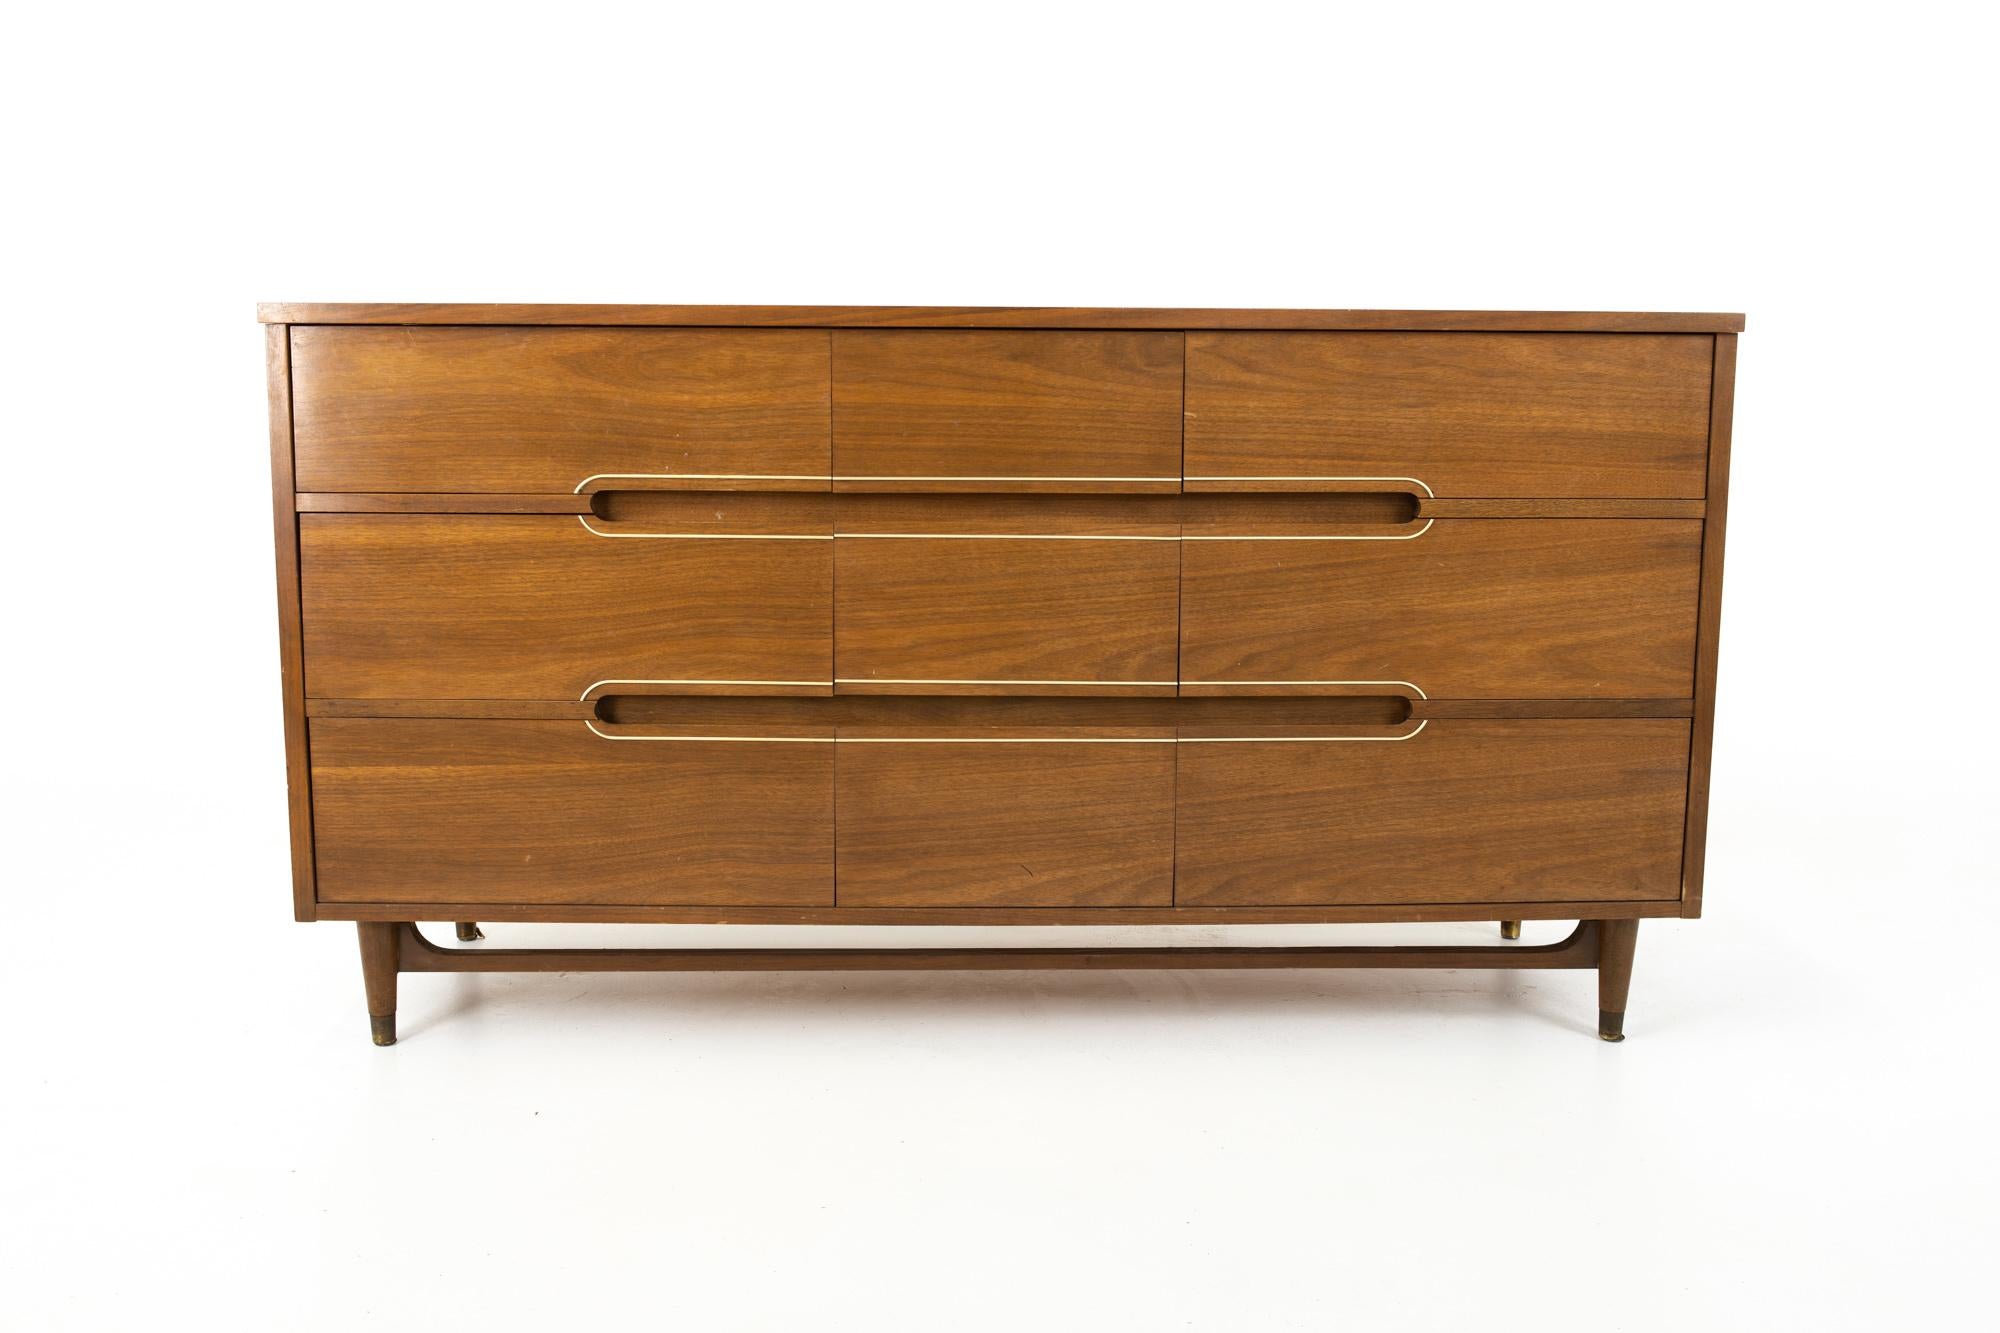 Kroehler Mid Century walnut and brass 9-drawer lowboy dresser
Dresser measure: 60.25 wide x 19 deep x 31.75 inches high

This price includes getting this piece in what we call restored vintage condition. That means the piece is permanently fixed